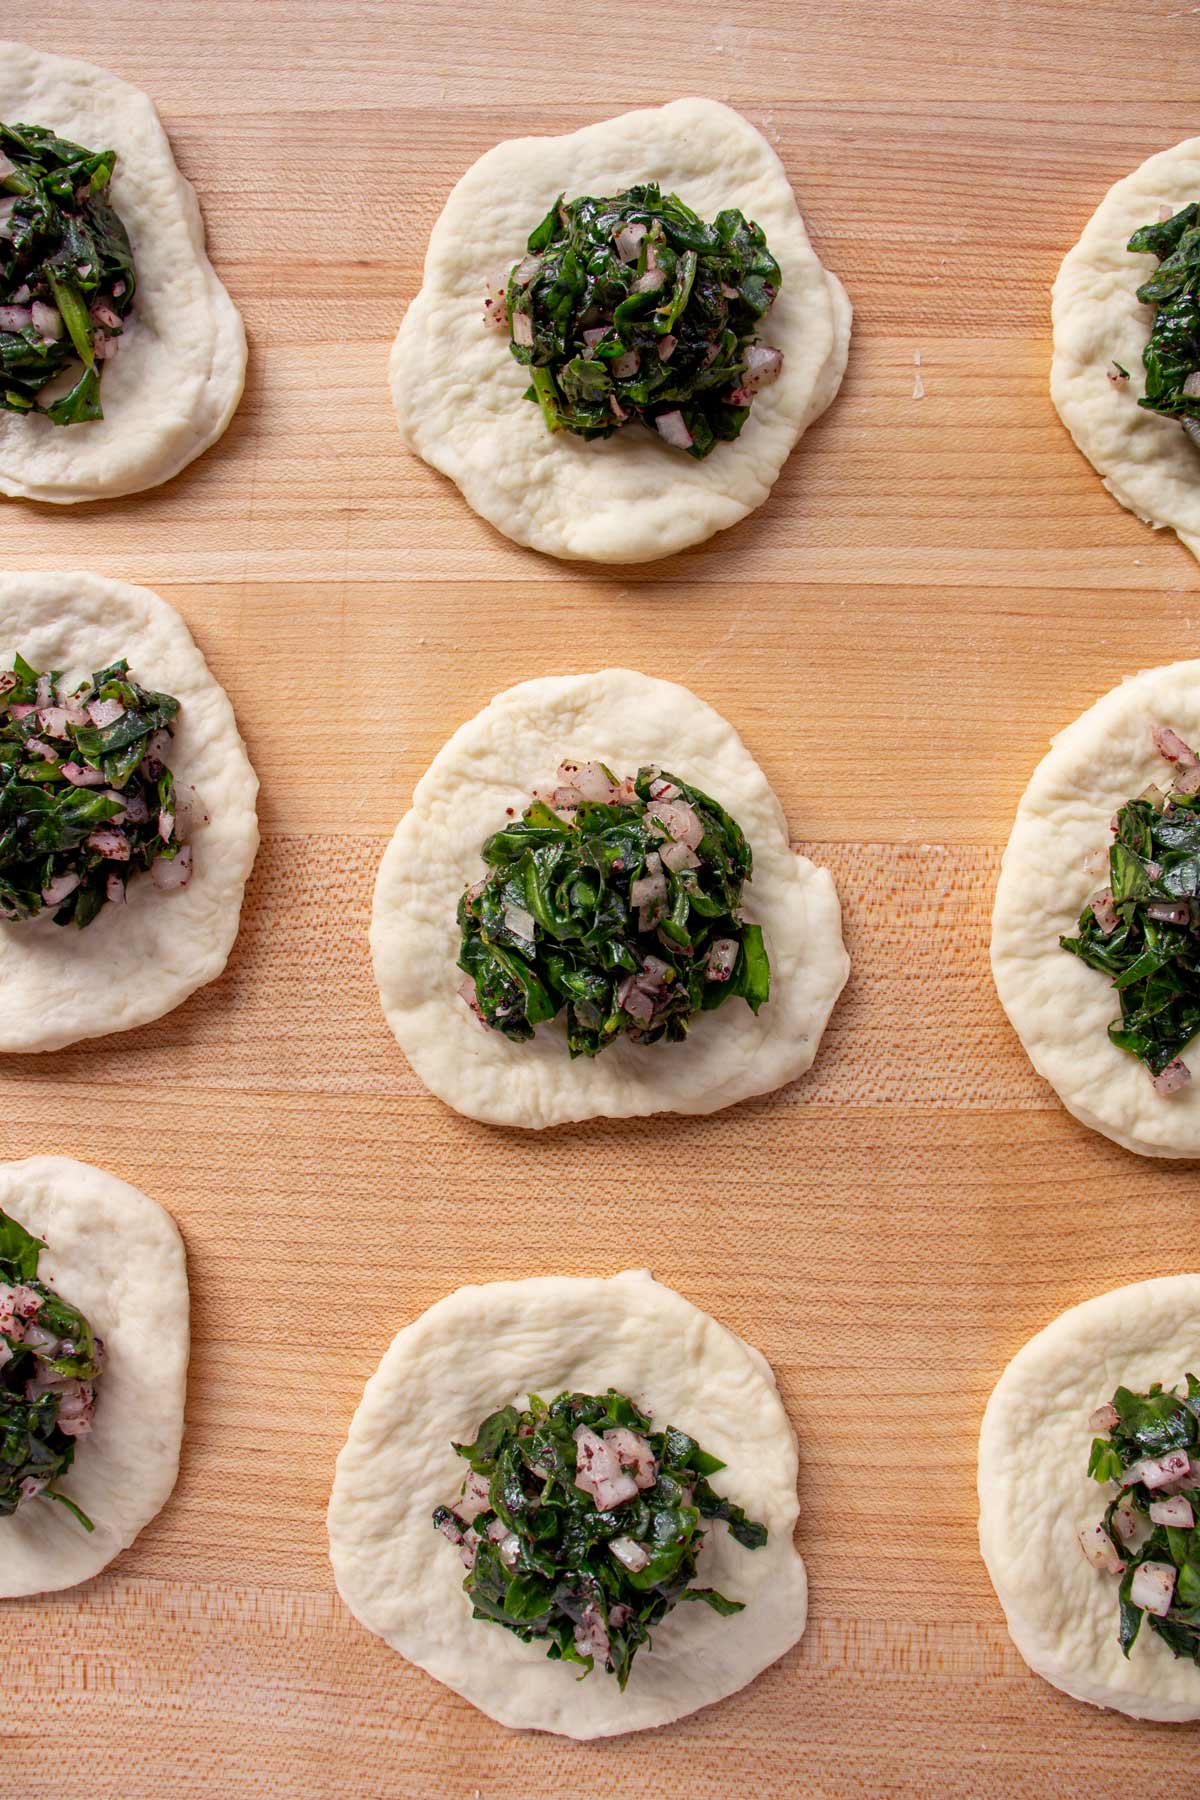 Scoops of spinach filling mounded onto small circles of dough on a wooden board..